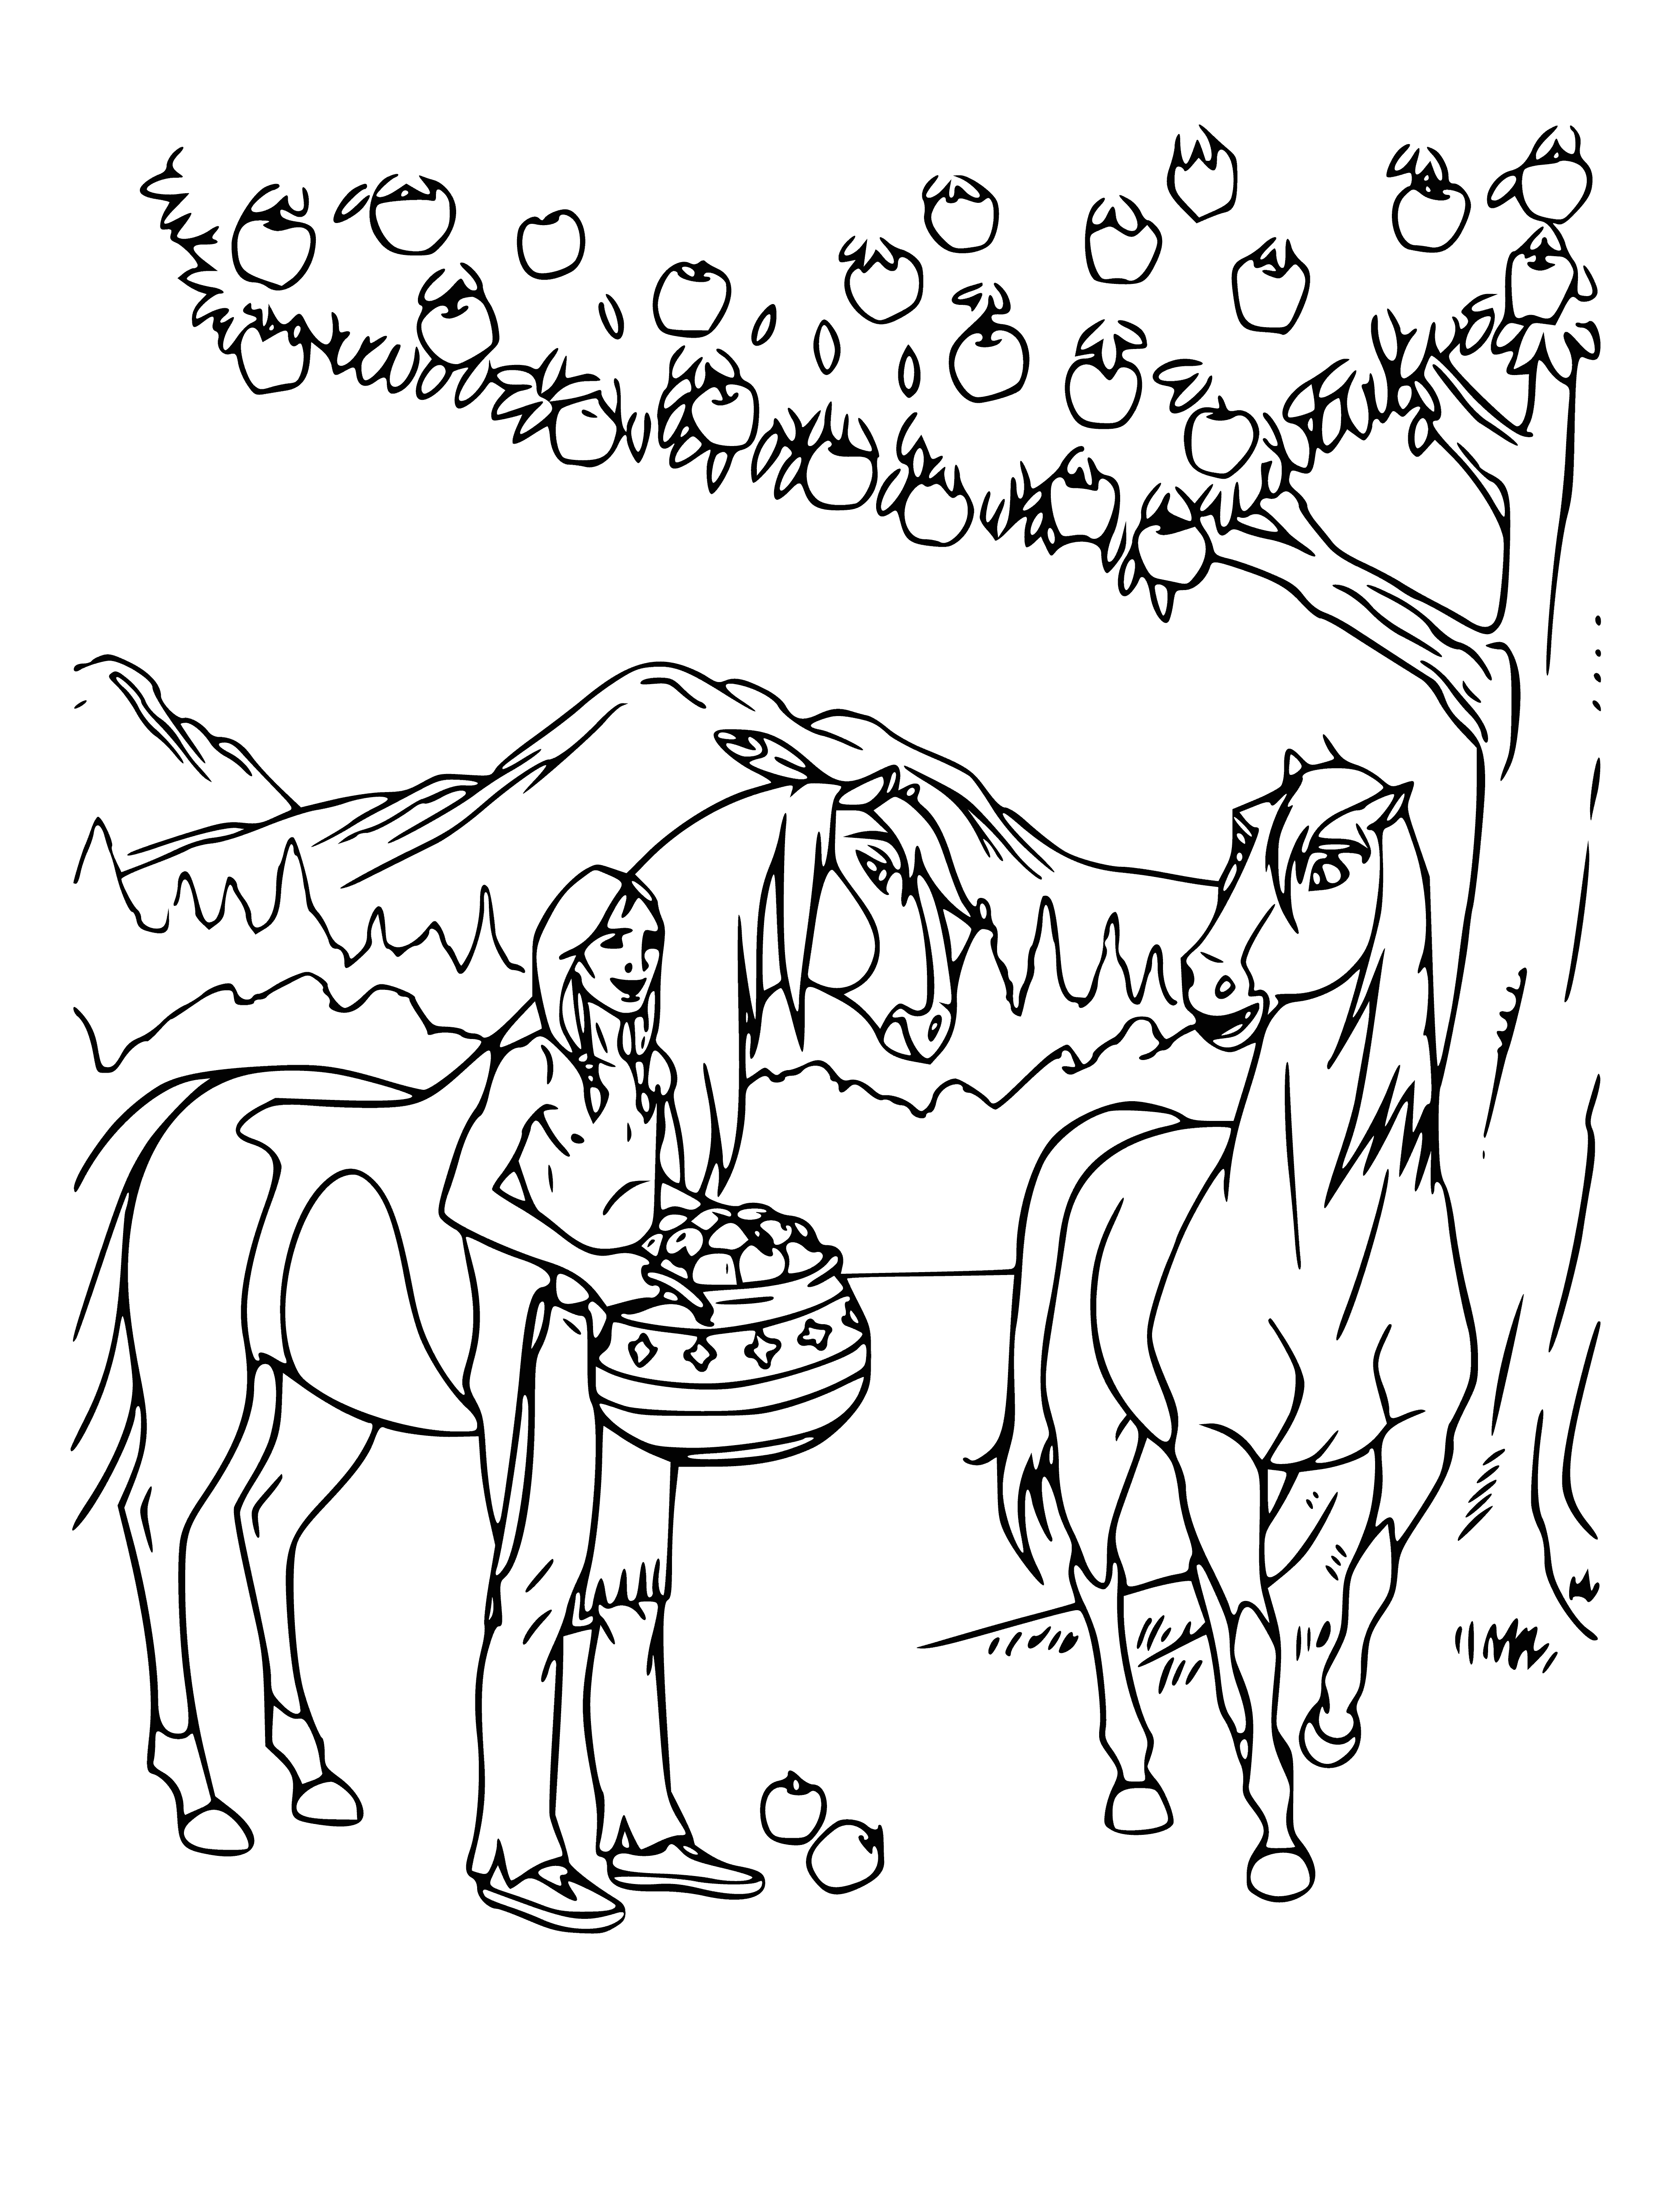 Indian with apples coloring page